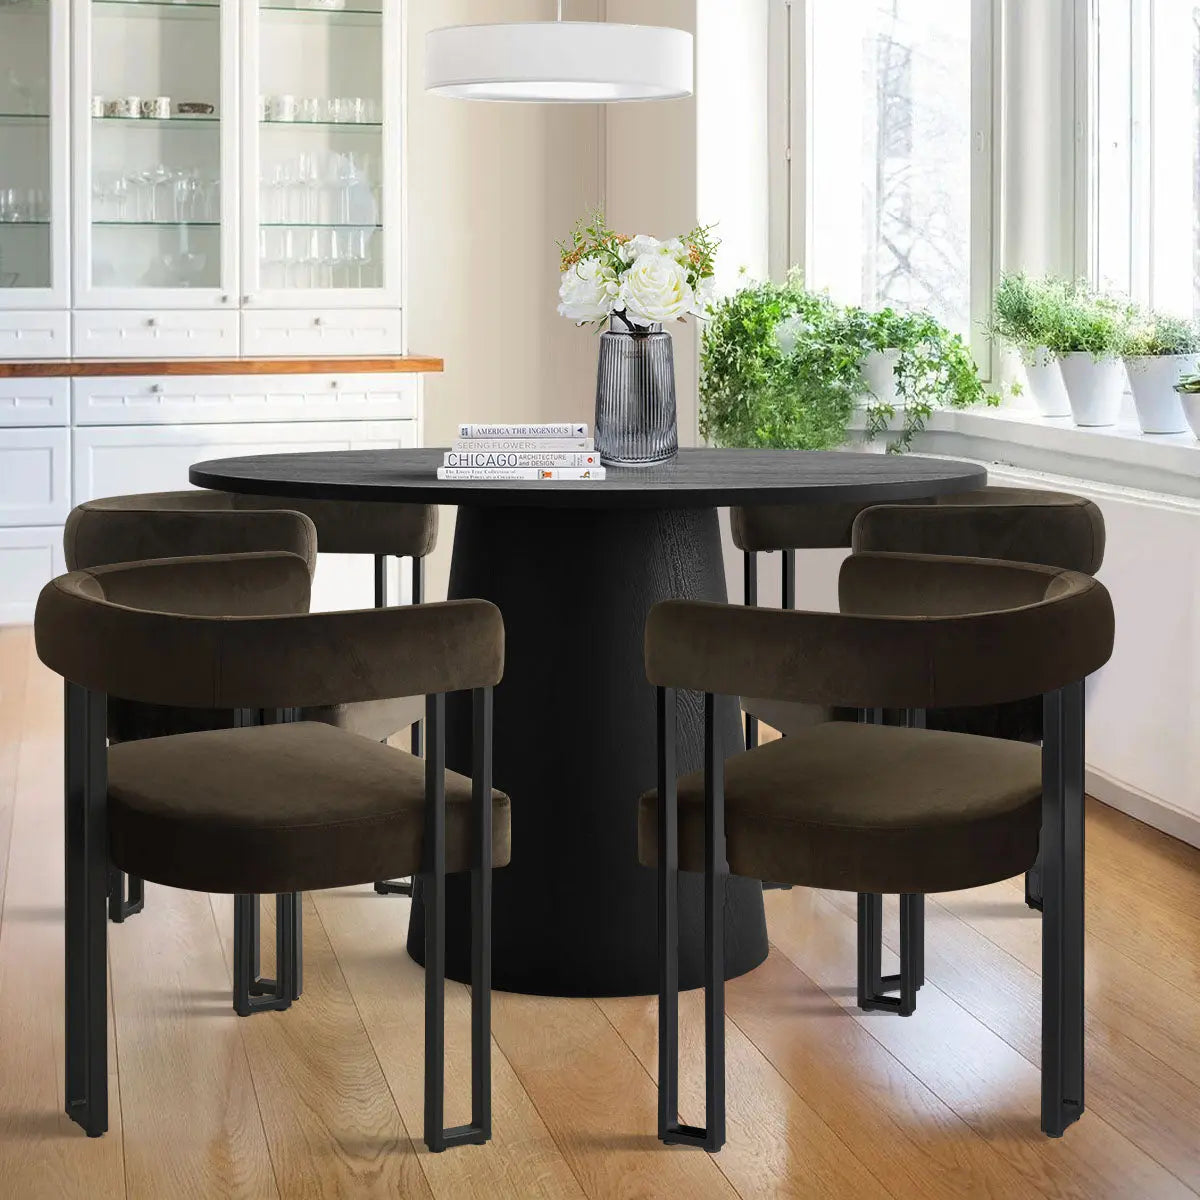 Ultra-modern 46” Dwen Solid Black Table & Plush Mia Velvet Dining Chair - Stylish, Robust 4-Seat Pedestal Round Dining Set for Contemporary Homes The Pop Maison